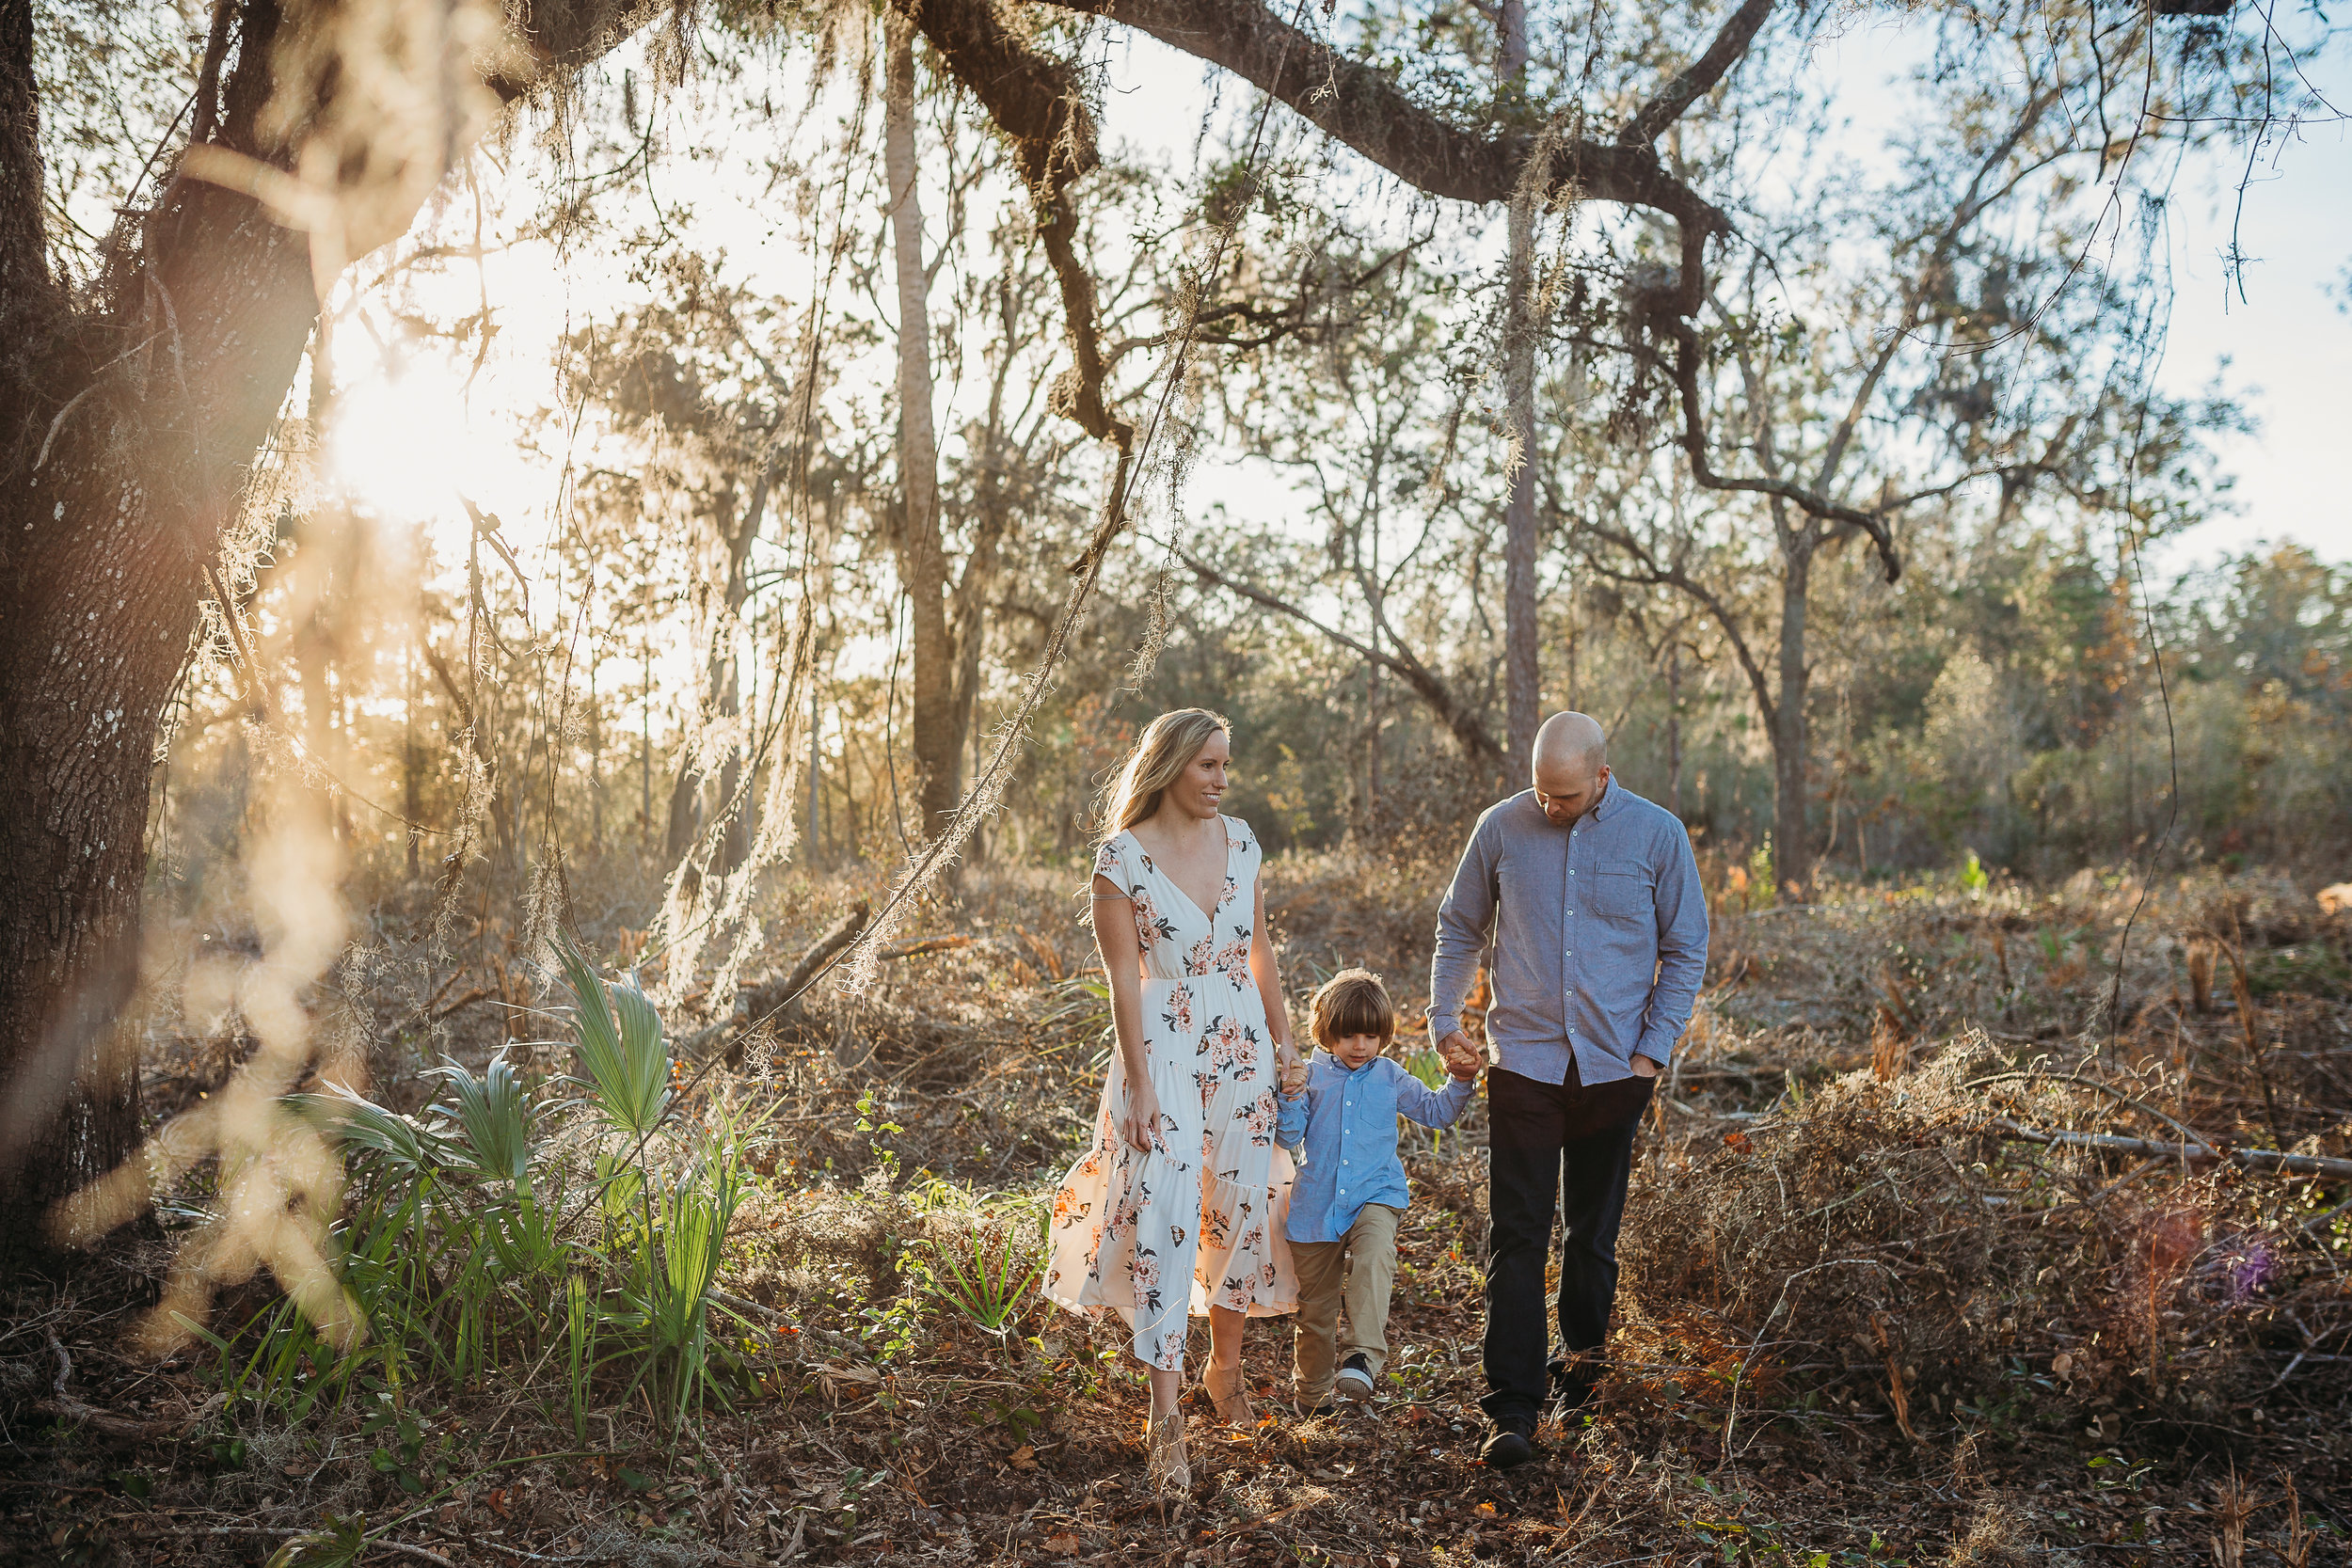 Lake Mary Family Photographer and what to wear to a family photoshoot in a field